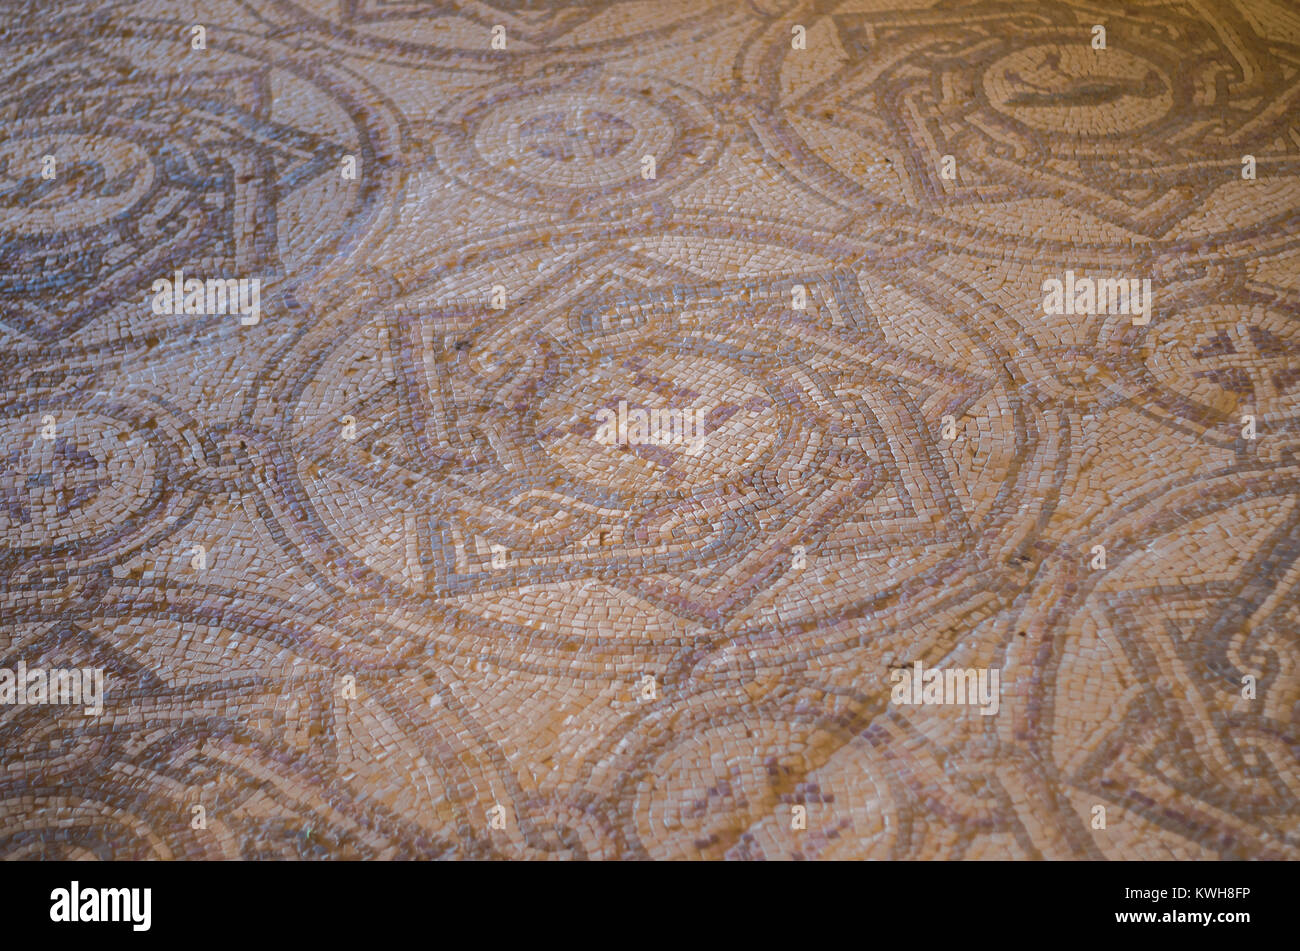 Chouf District, Lebanon, April 05 - 2017: Mosaic floor with inverted swastika in historic palace located inside the Beit ed-Dine (Beiteddine) palace, Stock Photo